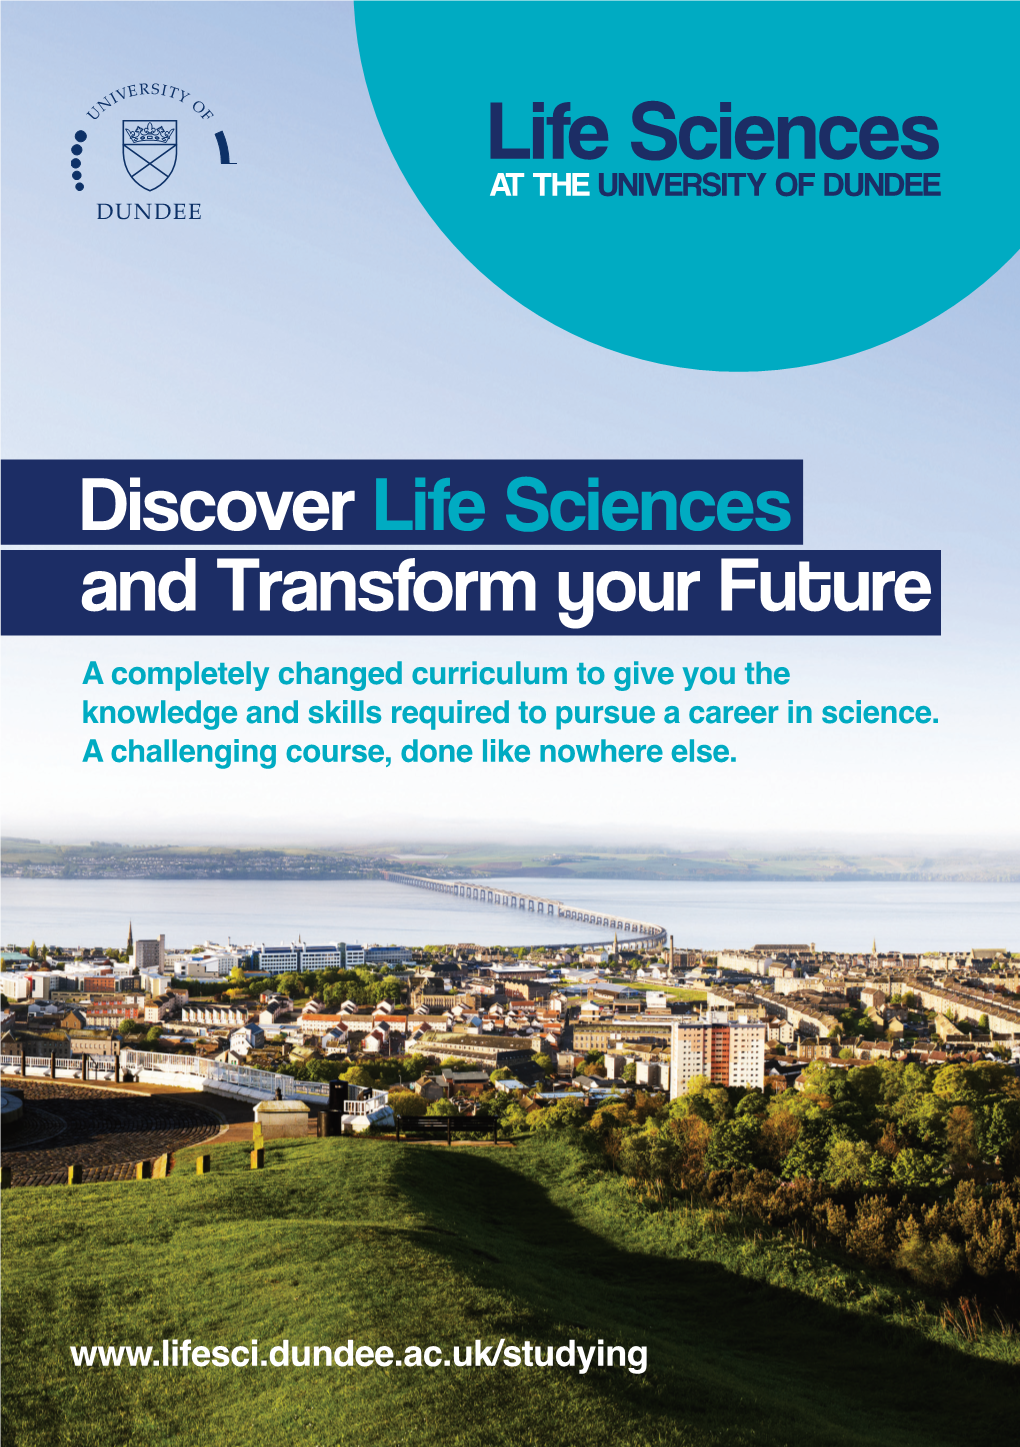 Life Sciences at the UNIVERSITY of DUNDEE